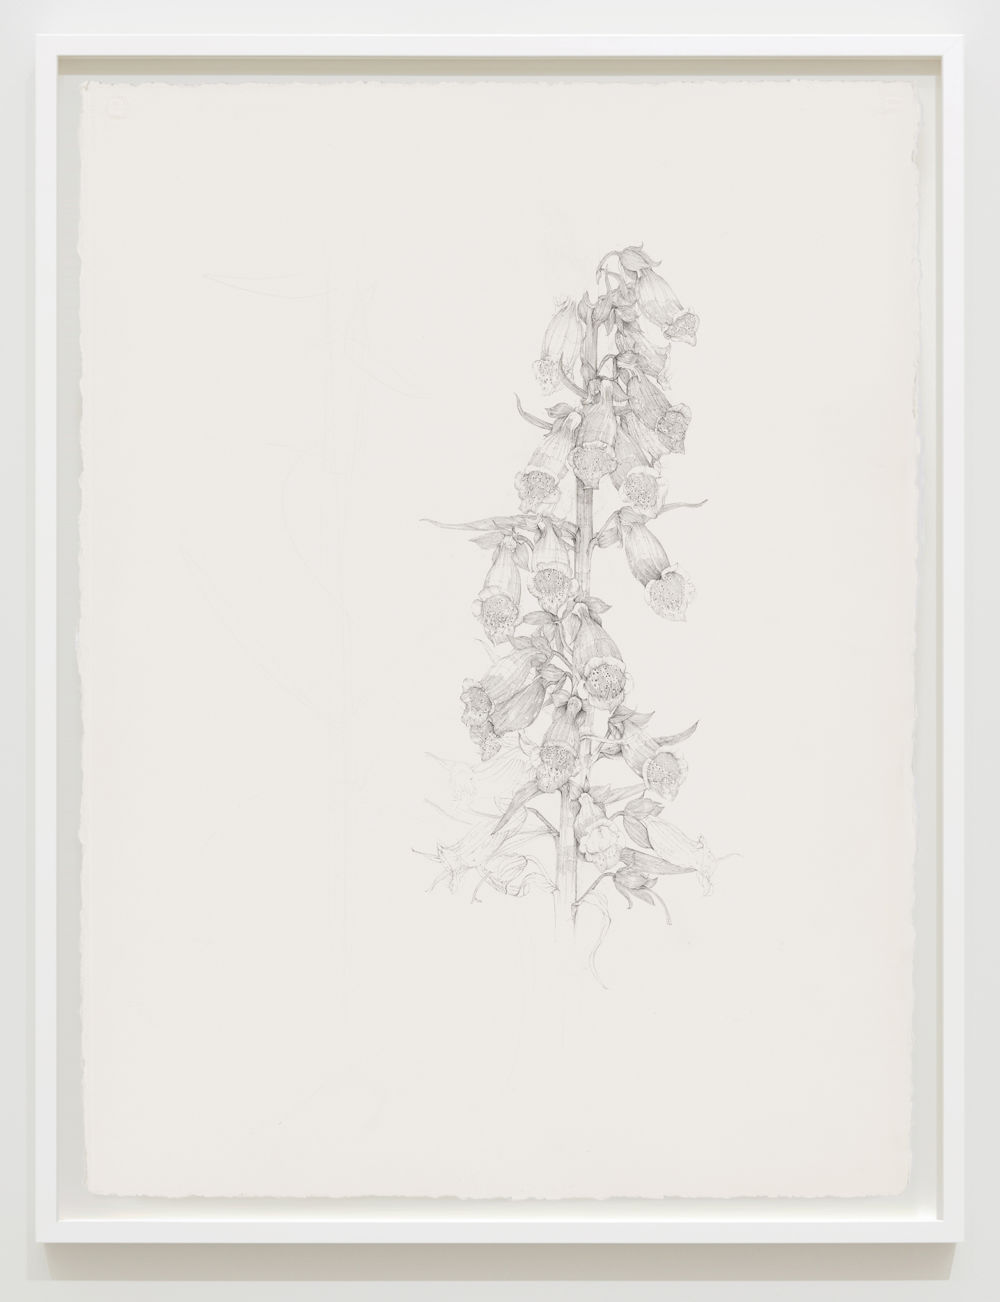 ​Charmian Johnson, not titled, unknown date, ink and graphite on paper, 34 x 26 in. (85 x 65 cm) by 